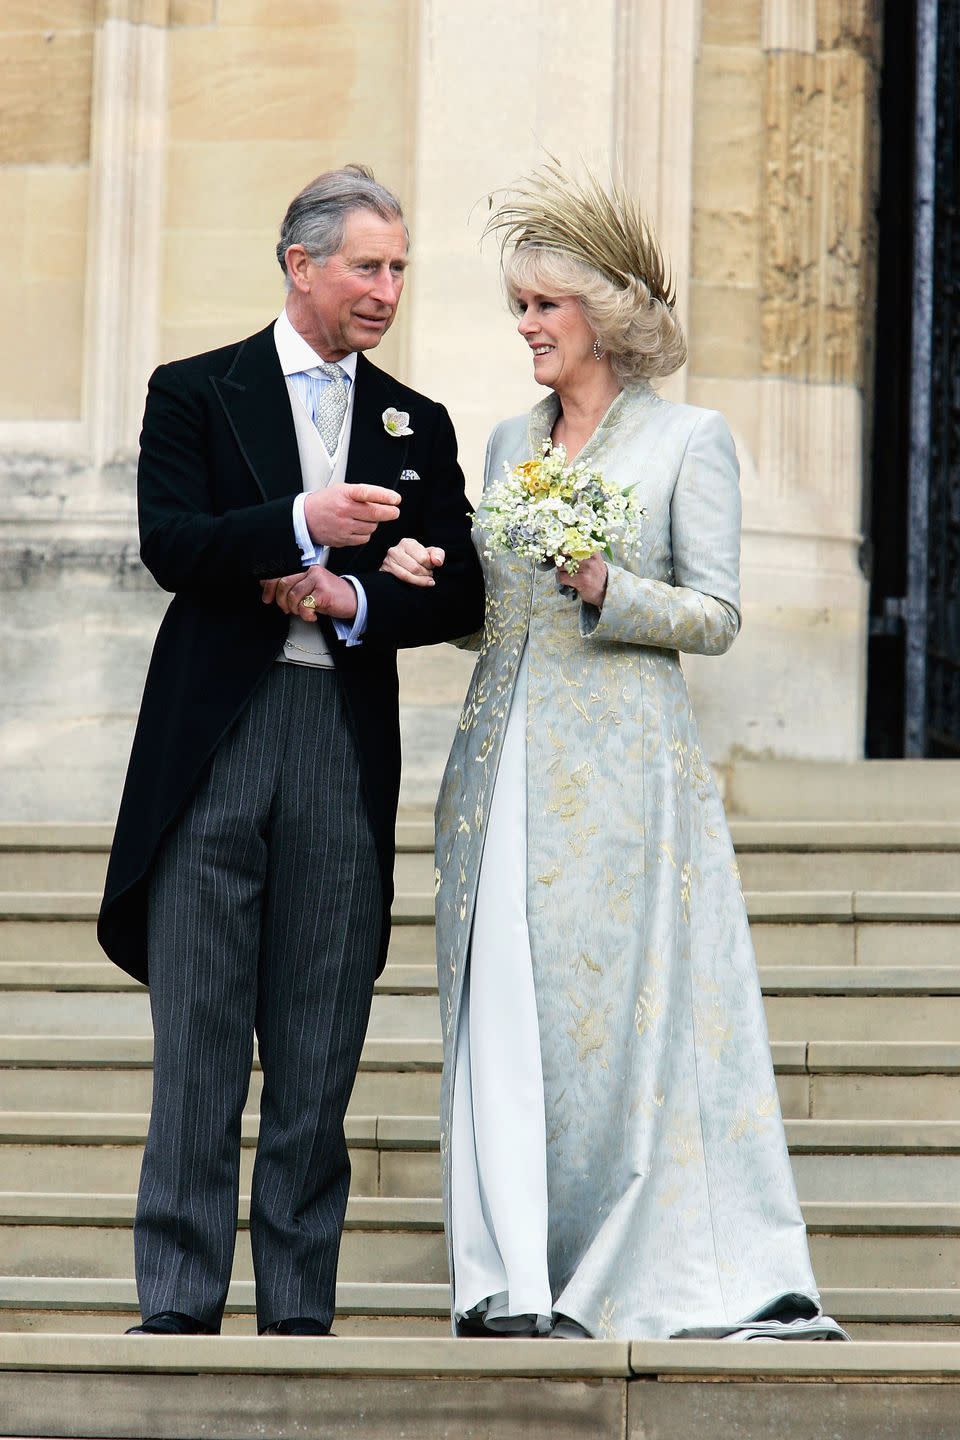 <p>Camilla, Duchess of Cornwall, wore a blue-gold dress coat by Robinson Valentine, which was inspired by her mother's jewelry, for her exchanging of vows with Prince Charles. She wore a headpiece by Philip Treacy. </p>